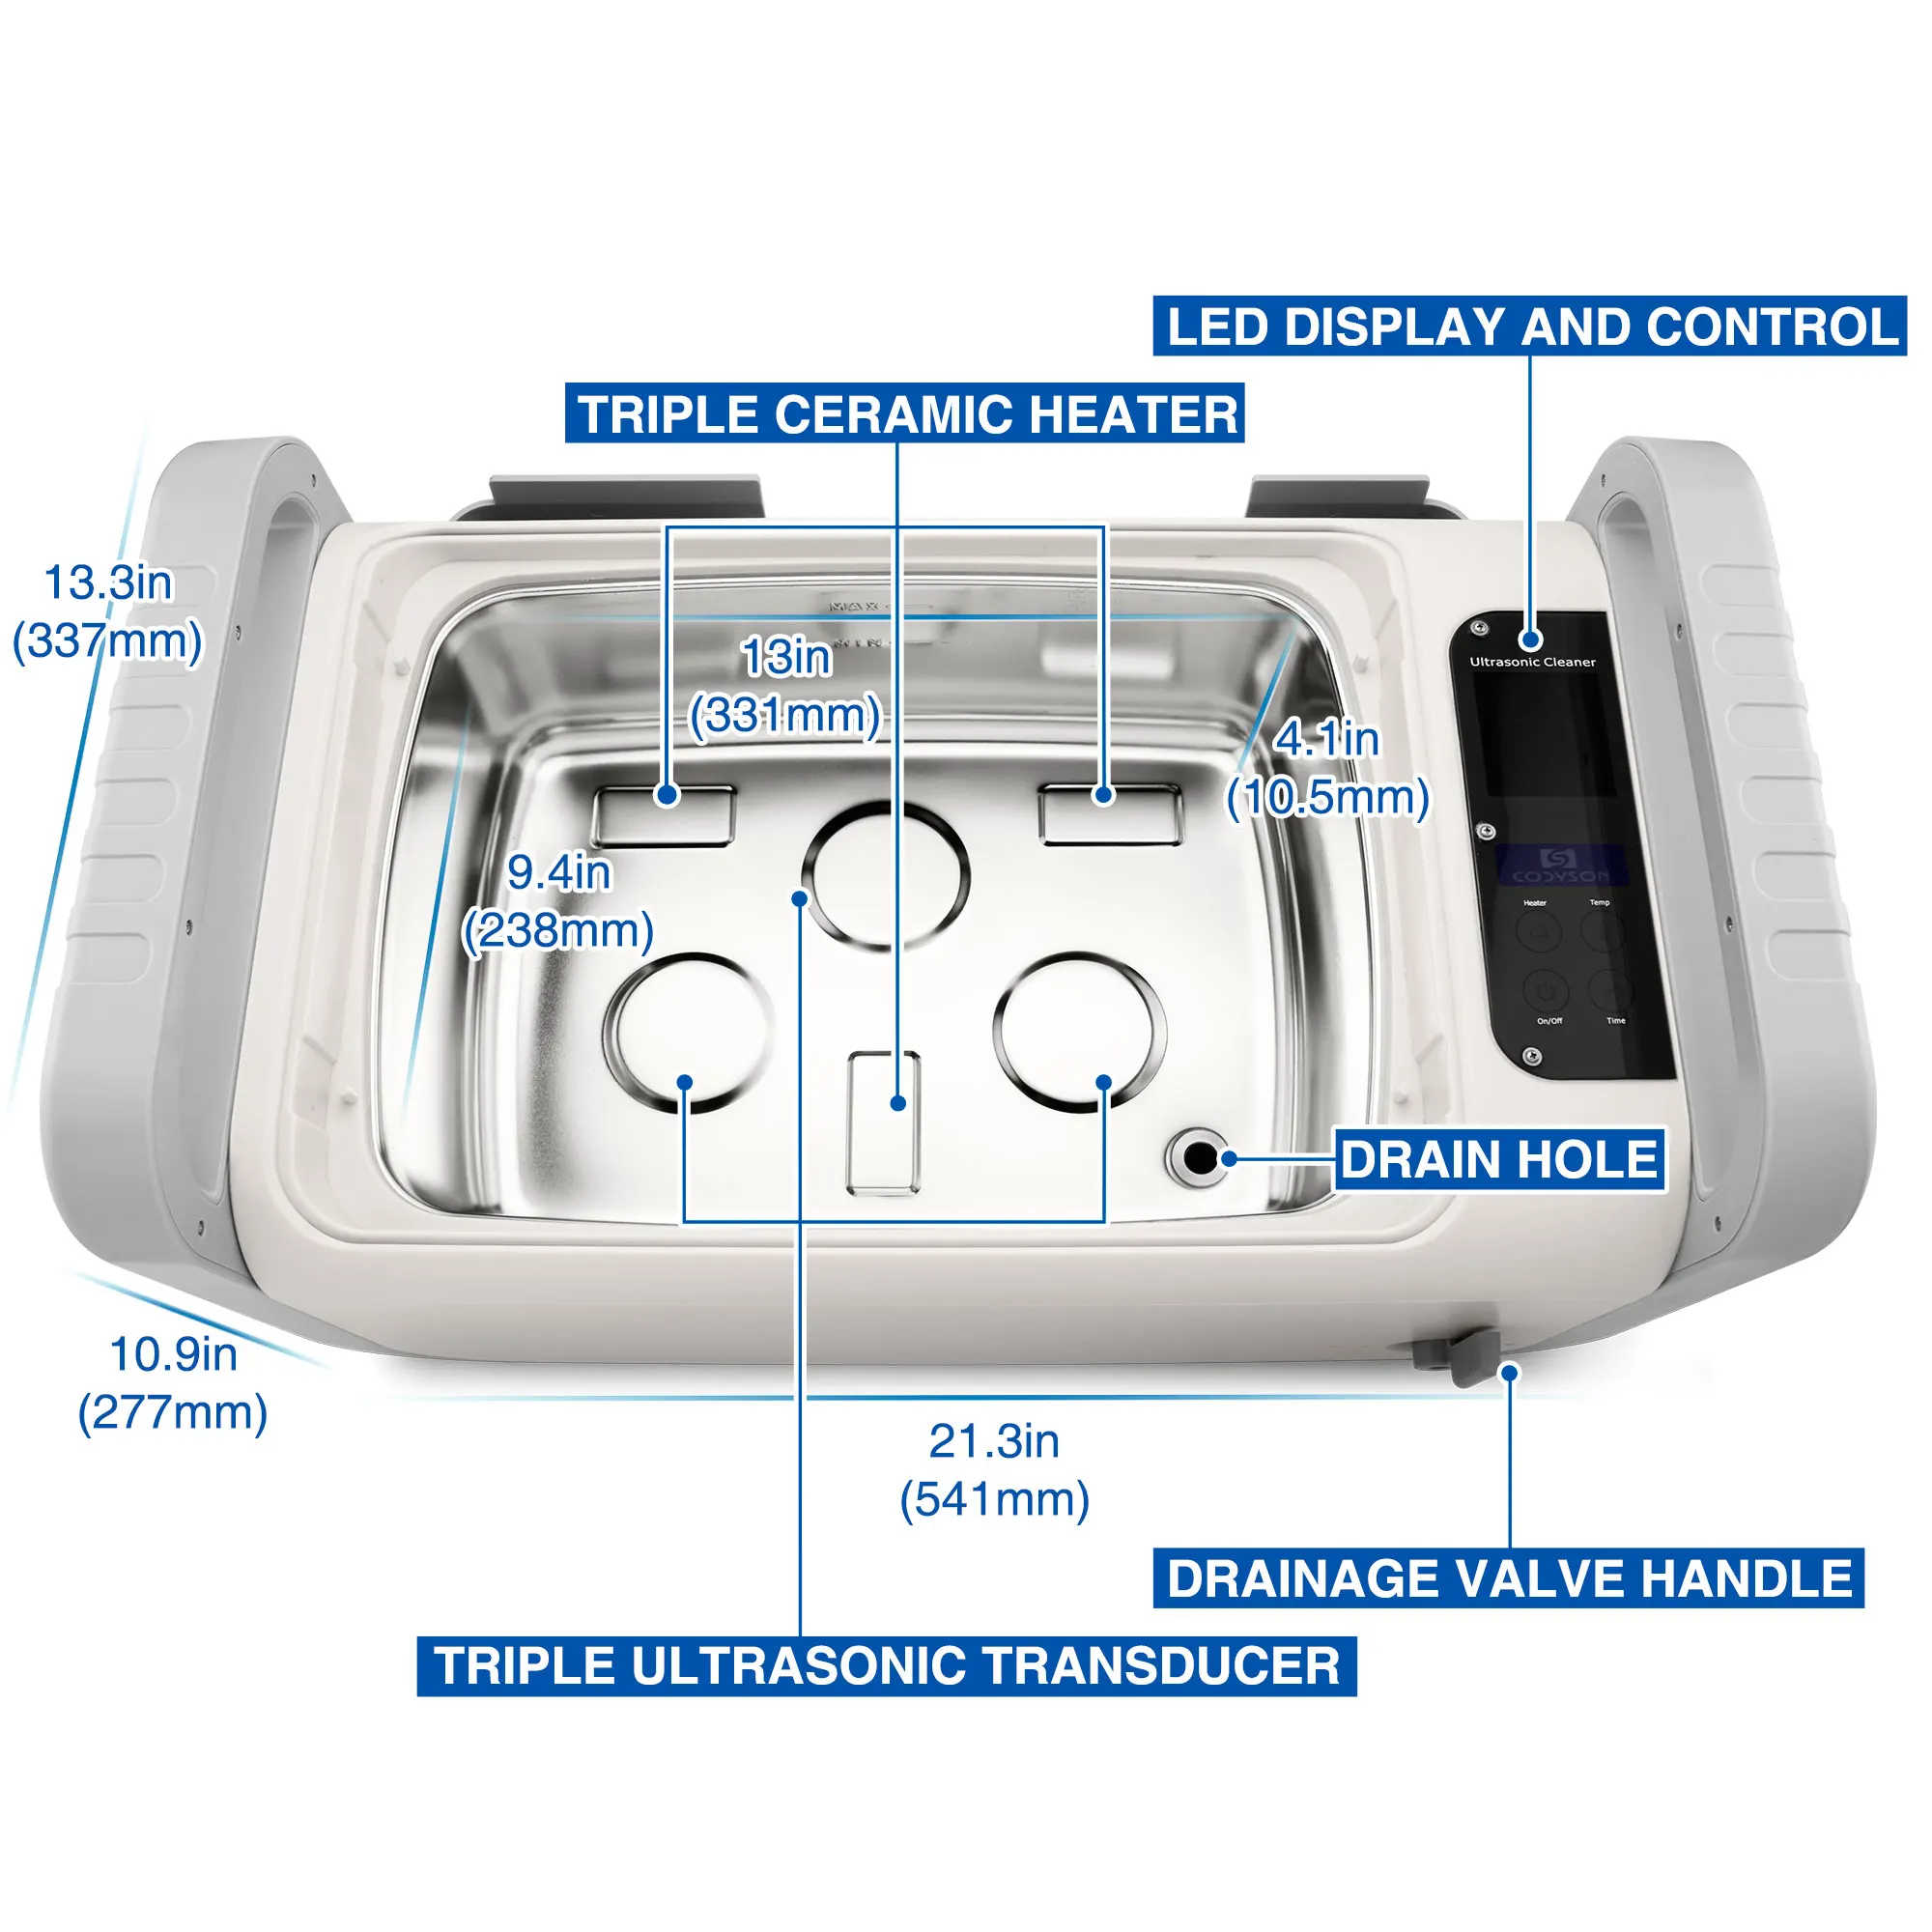 Digital heated ultrasound lp record cleaning 7.5L ultrasonic cleaner